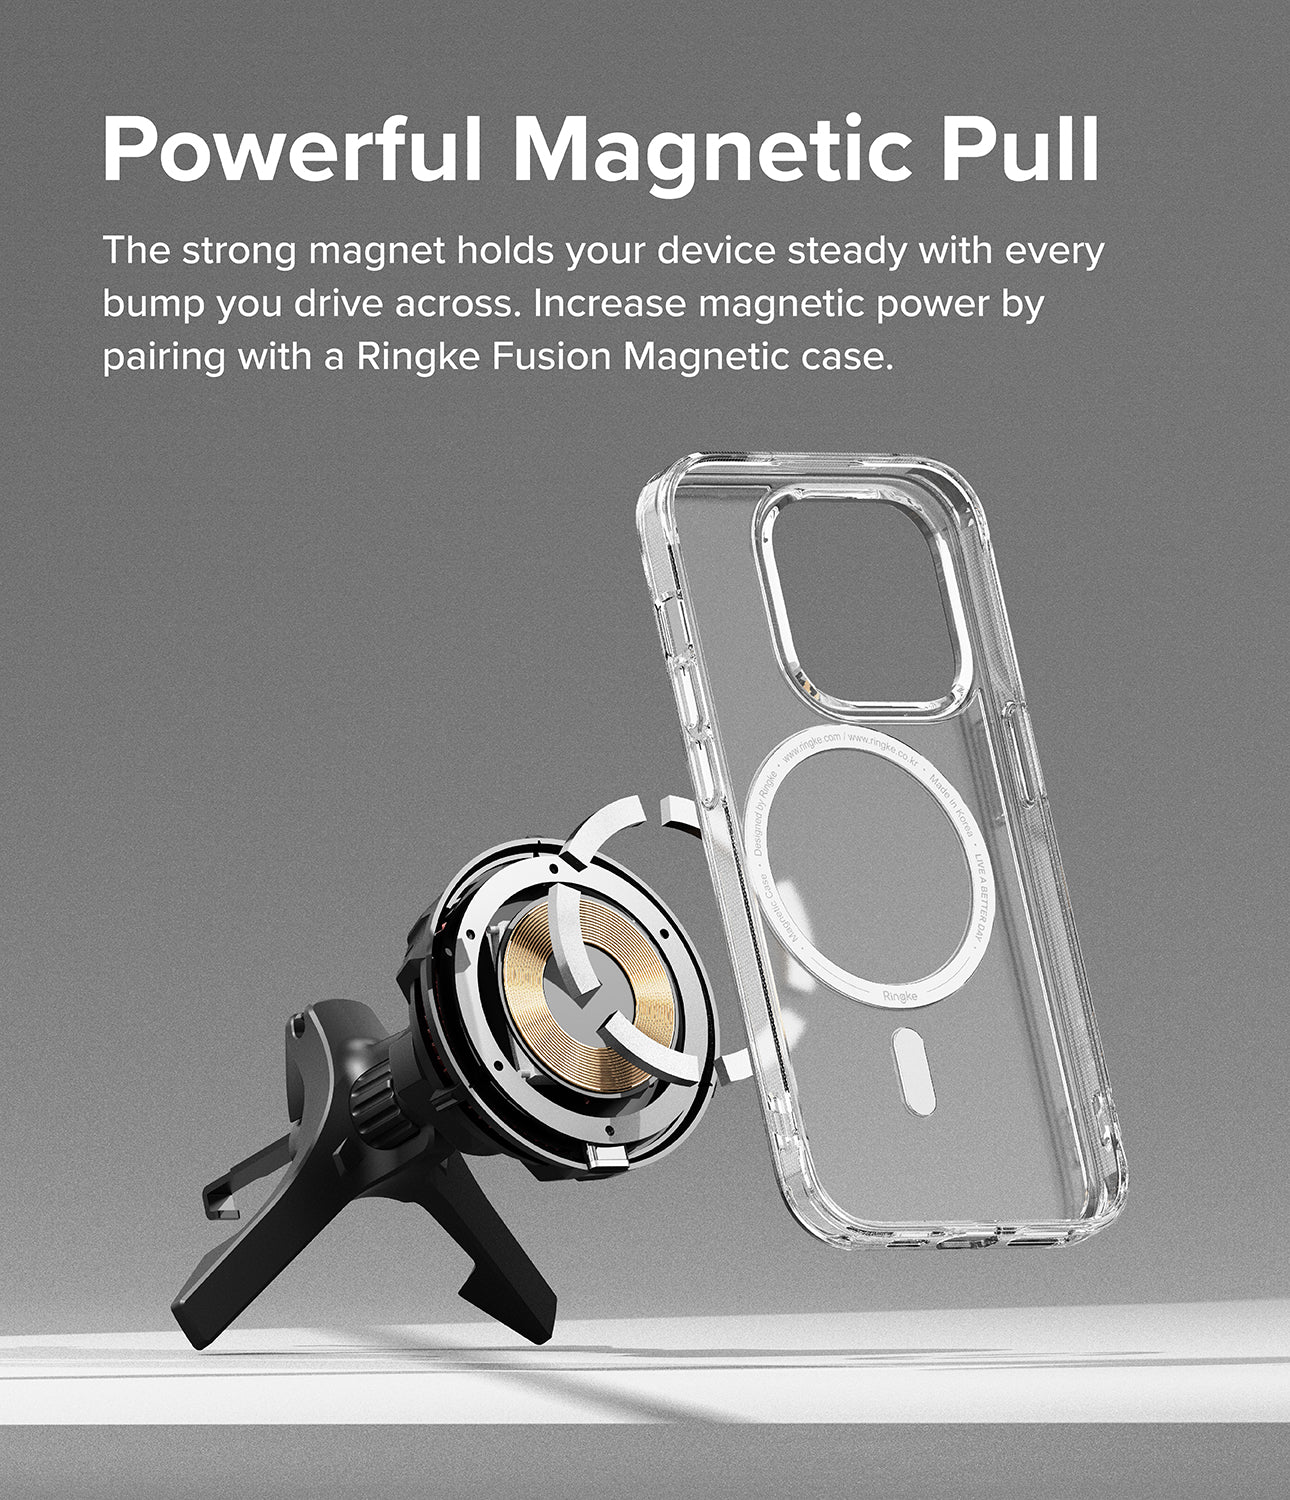 Ringke Peltier Magnetic Car Charger Mount - Powerful Magnetic Pull. The strong magnet holds your device steady with every bump you drive across. Increase magnetic power by pairing with a Ringke Fusion Magnetic case.